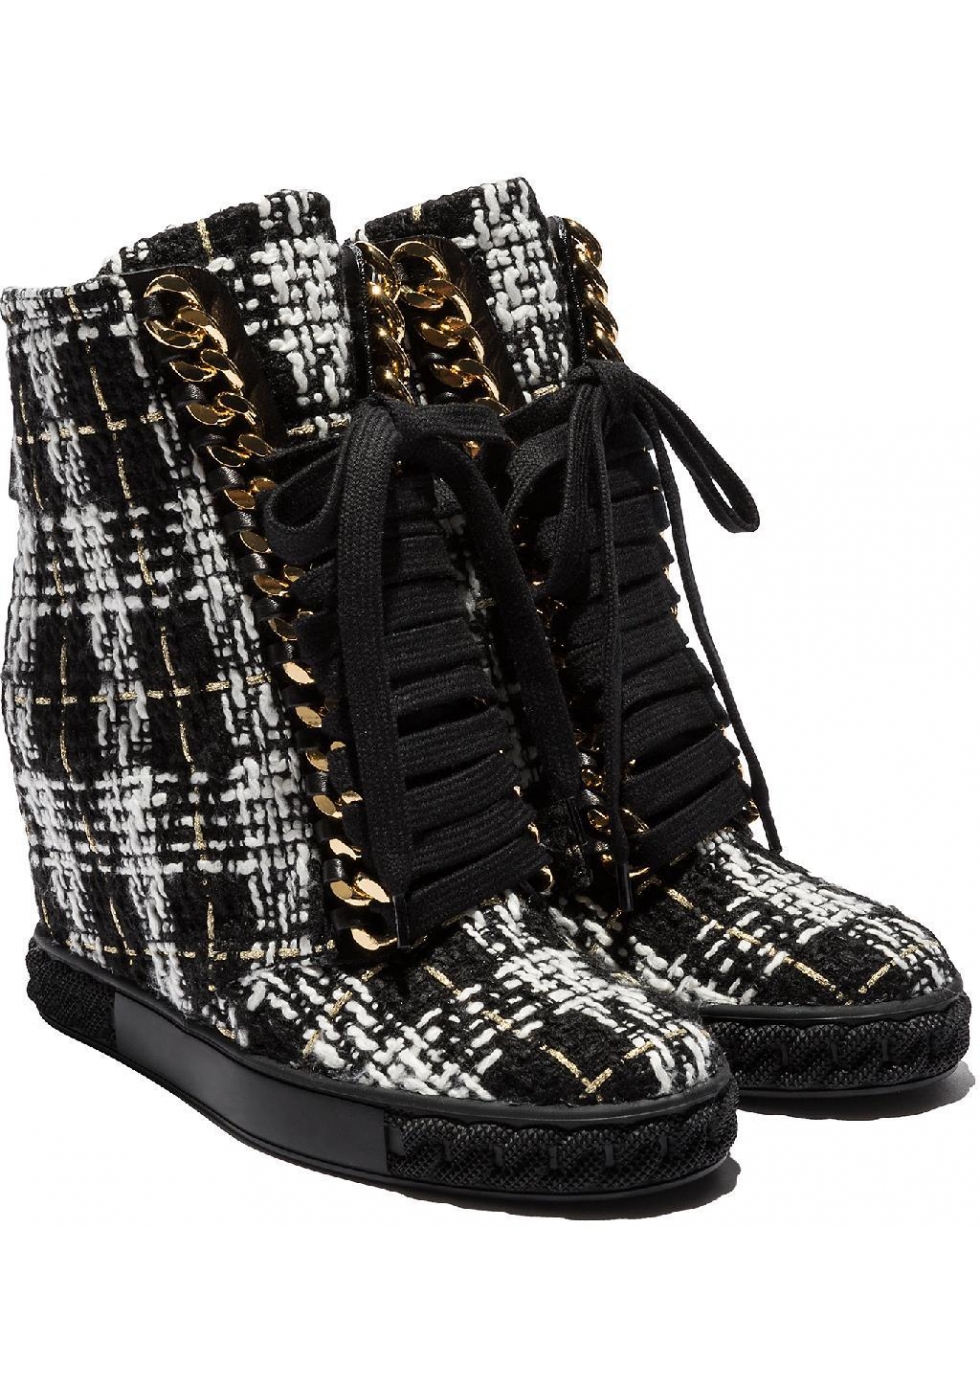 Casadei wedges ankle boots in black/white fabric - Italian